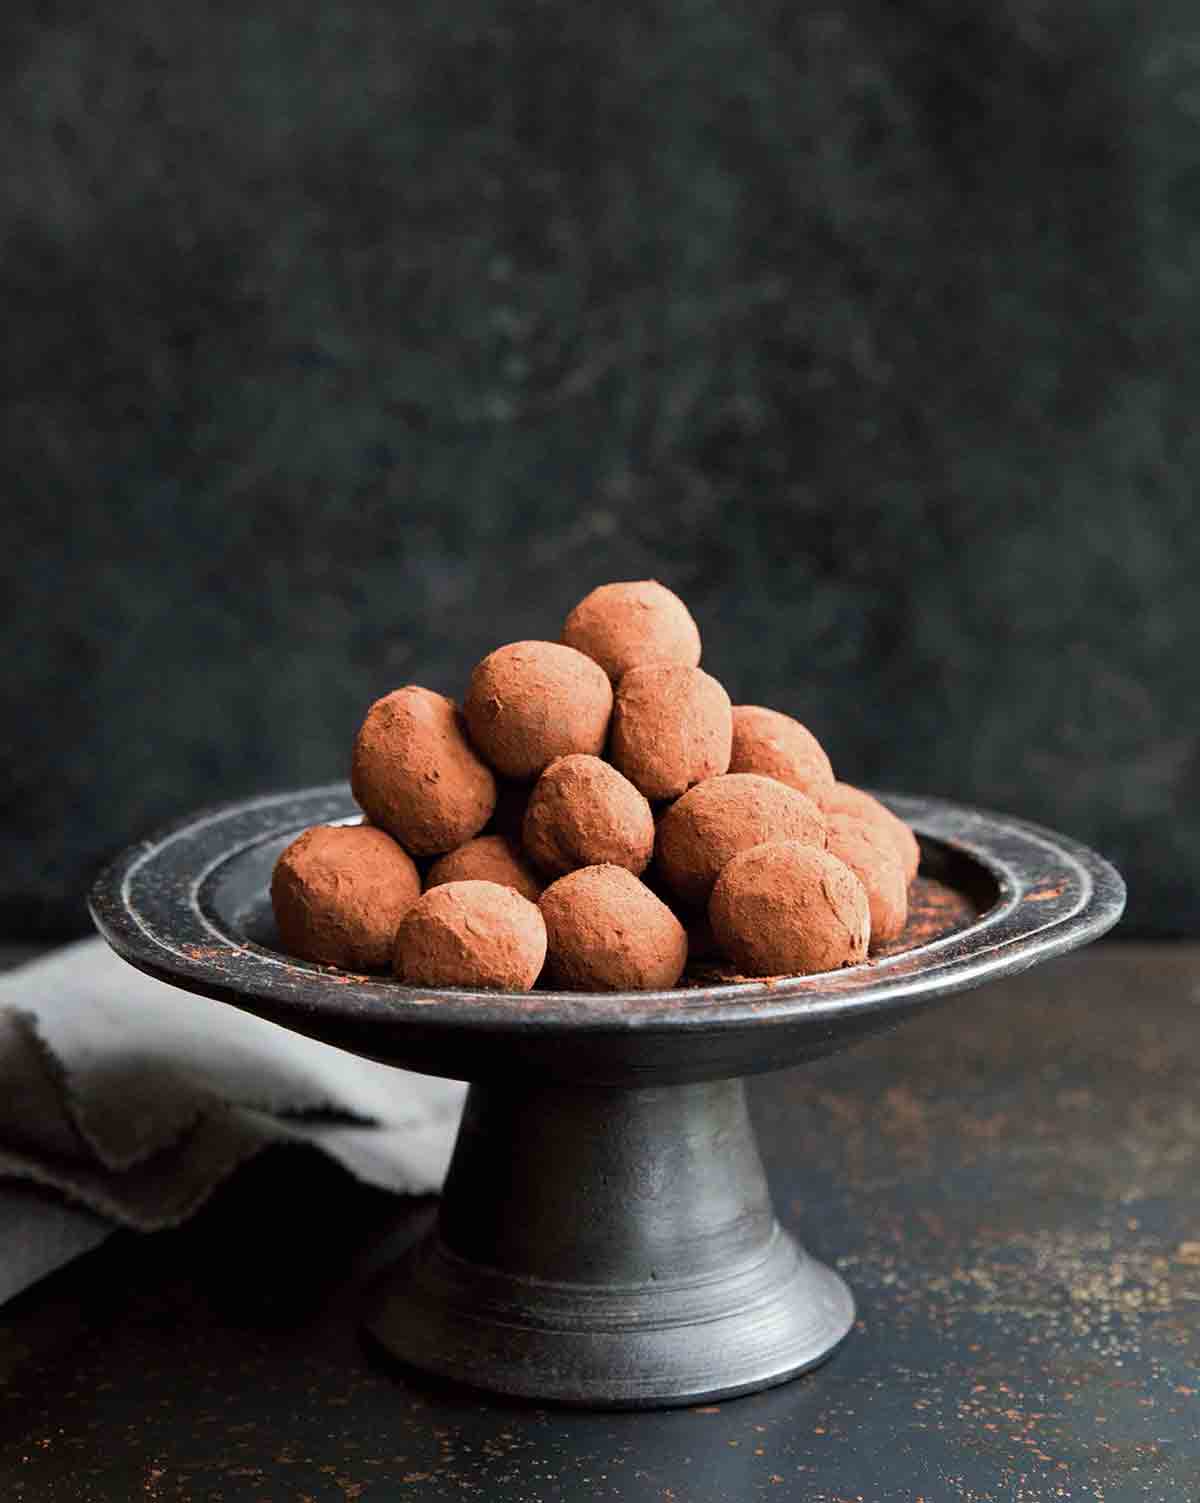 A pewter cake stand piled with chocolate truffles.